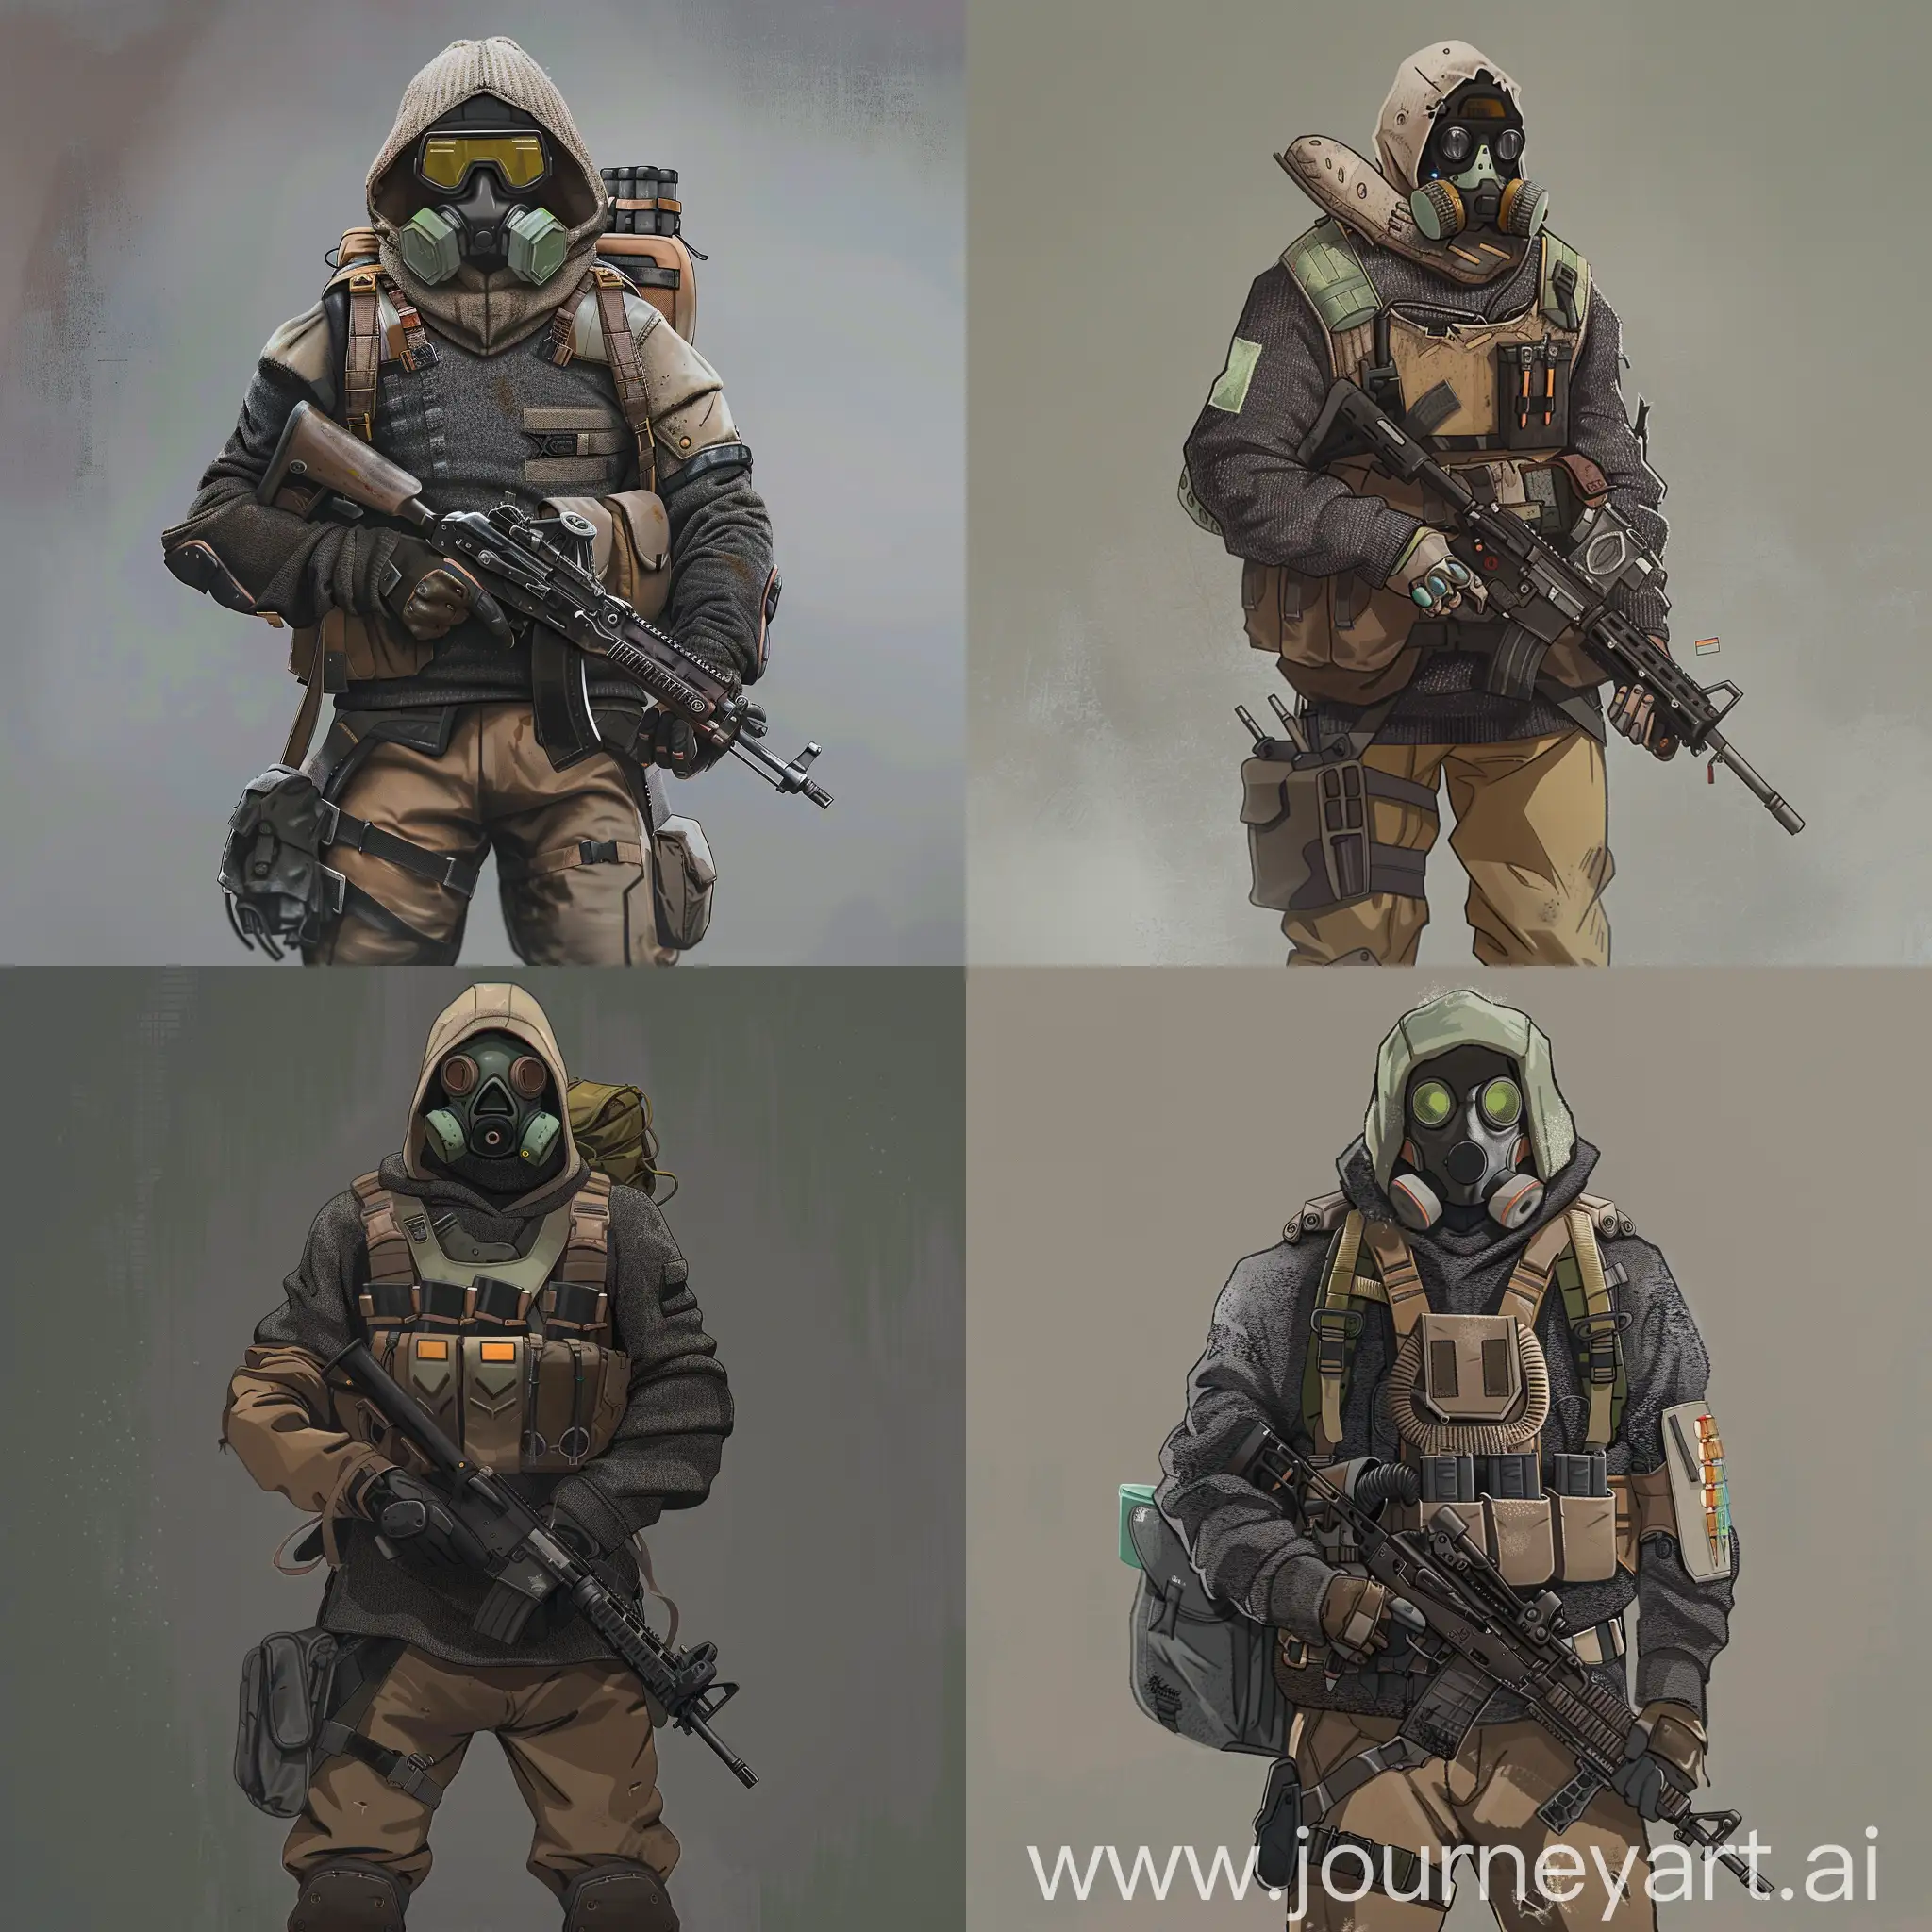 Digital art, character design concept art, stalker is wearing a dark gray dirty sweater, military unloading is worn over the sweater, over the sweater is a dirty brown jacket with military unloading and armor, a gasmask on his face, he has a rifle in his hands, a small gray backpack on his back.